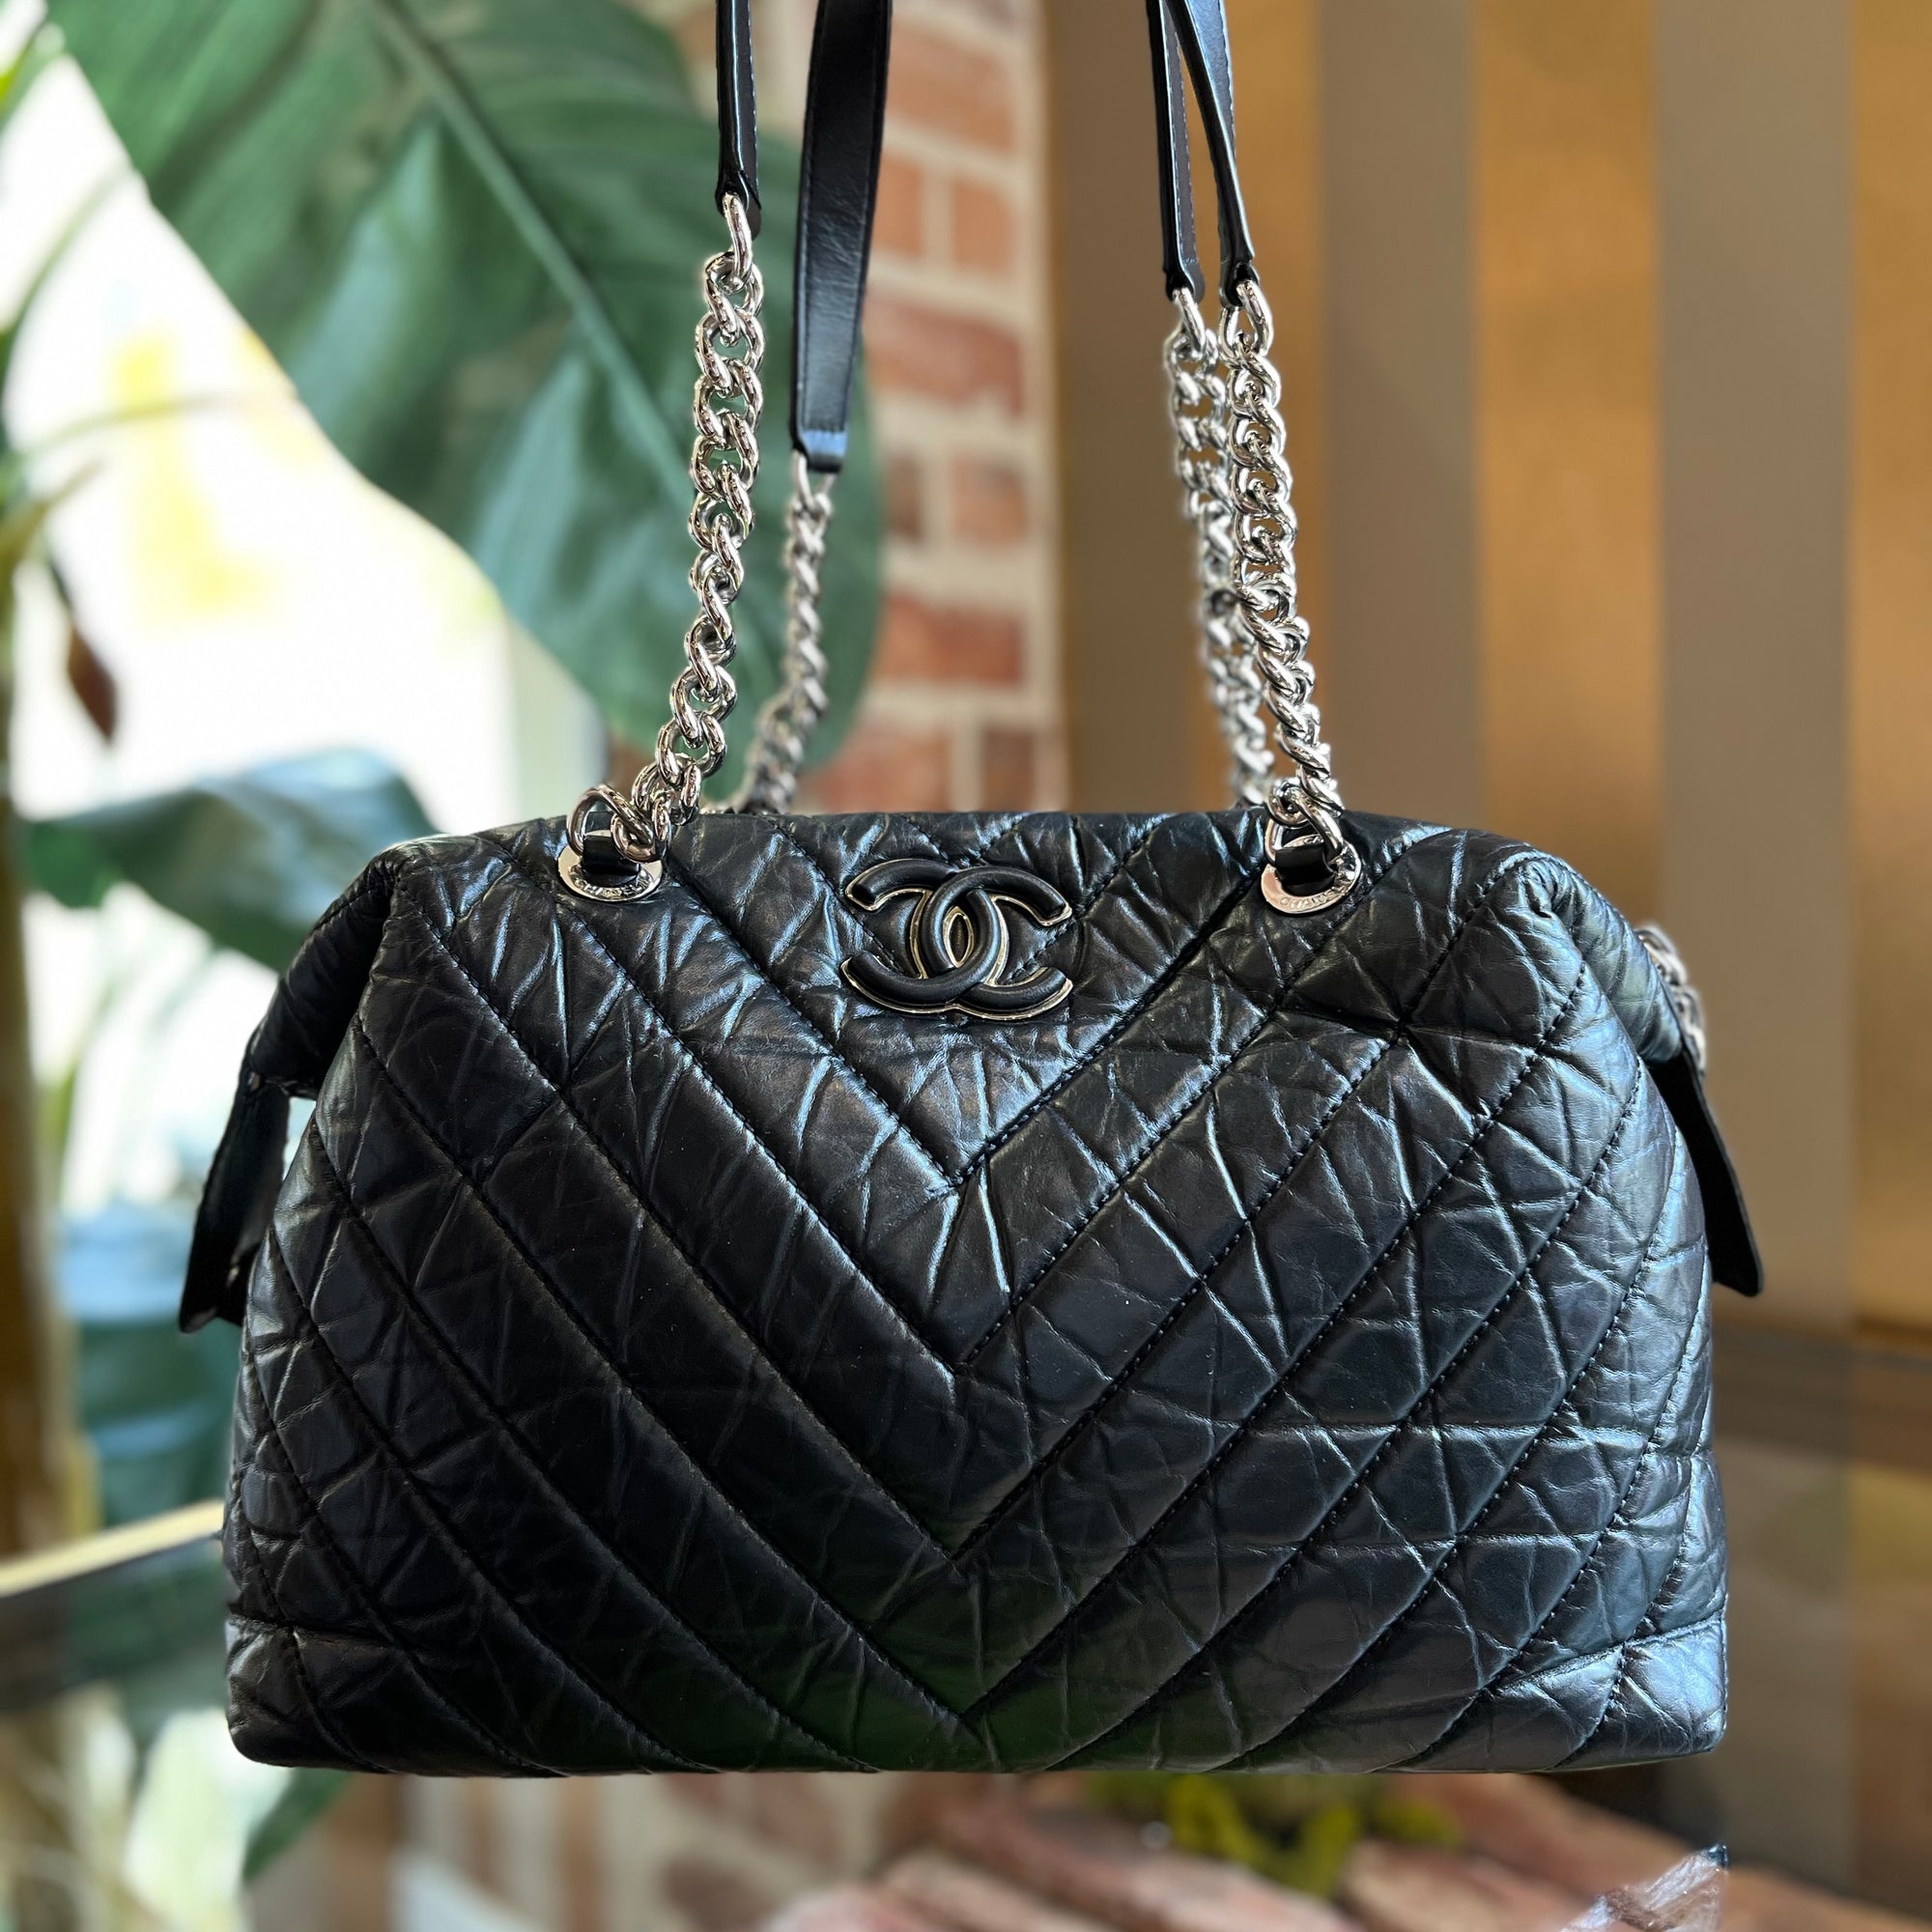 CHANEL Black Aged Calfskin Chevron Quilted Bowling Bag TS3429